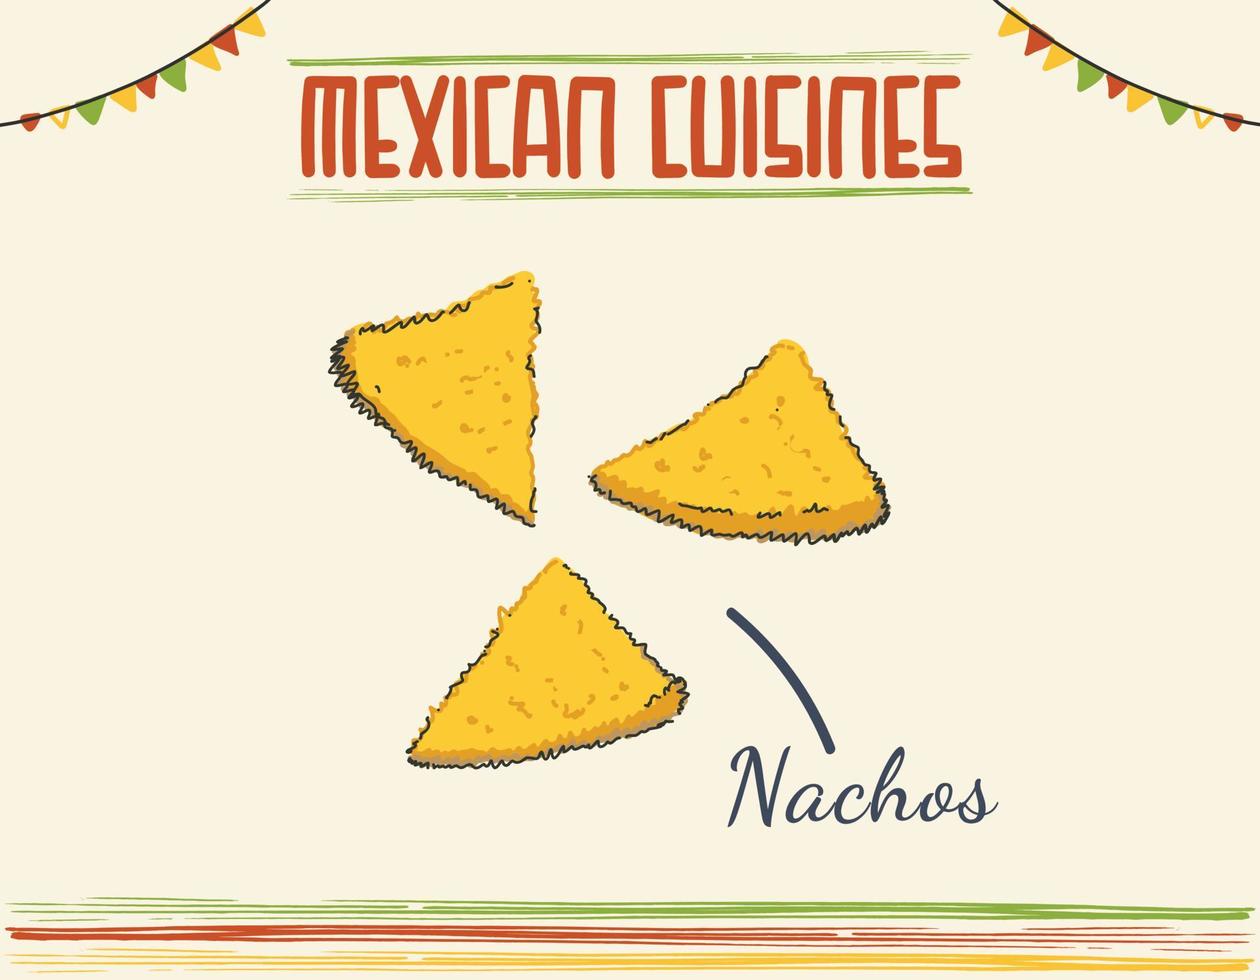 Nachos Chips with Cheese Dip Traditional Mexican Cuisine Dish Food Item from Cafe Menu Vector Ilustration Colored doodled style Italian cuisine, Lasagna dish. Minimal isolated vector illustration